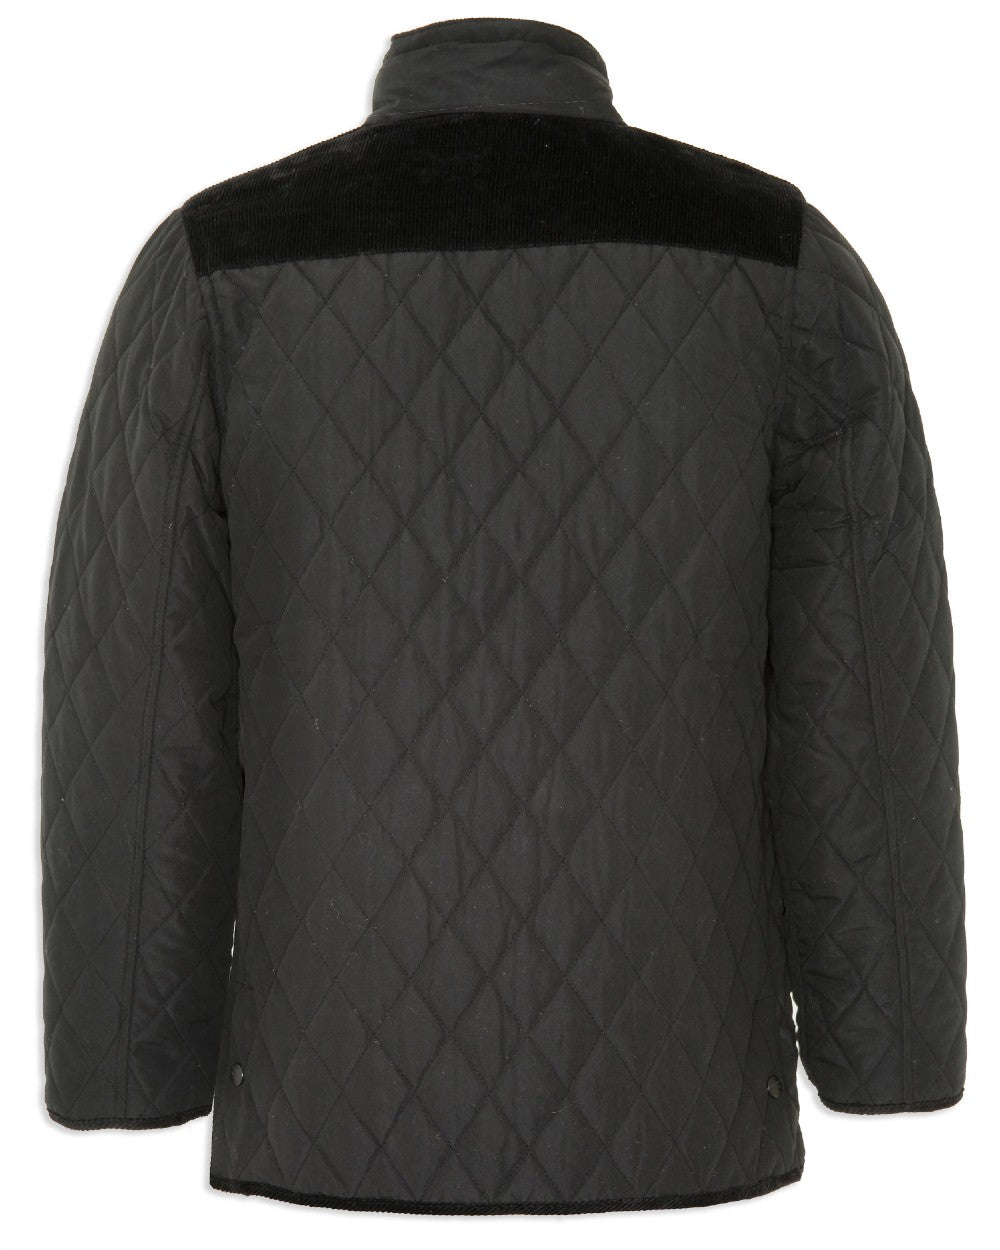 Quilted diamond leather jacket